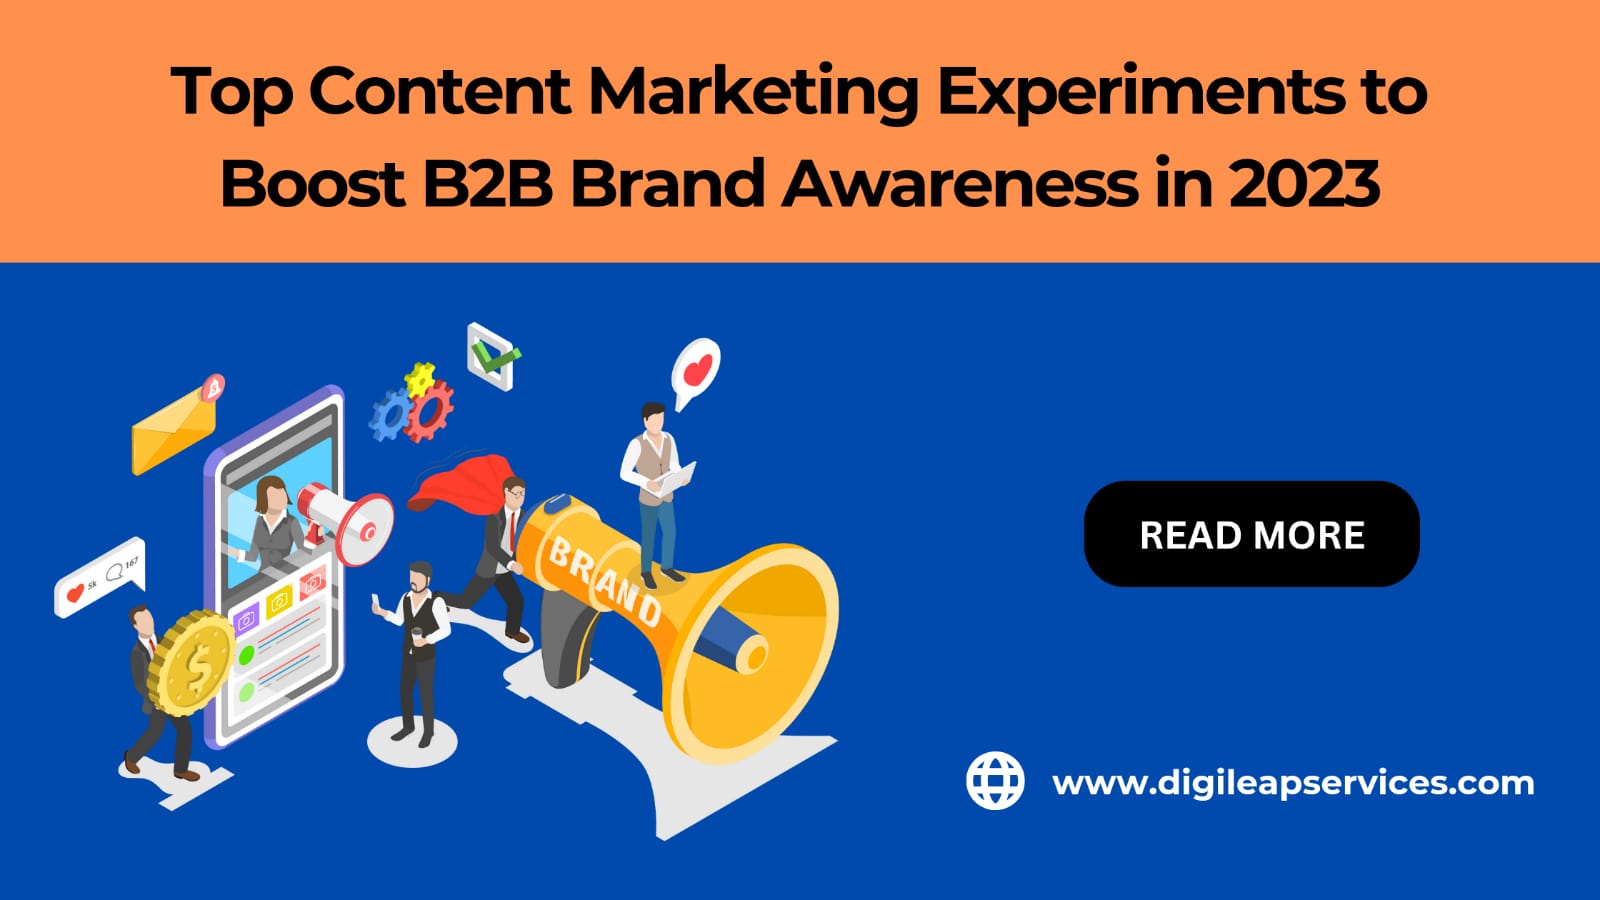 Content Marketing Experiments to Boost B2B Brand Awareness in 2023